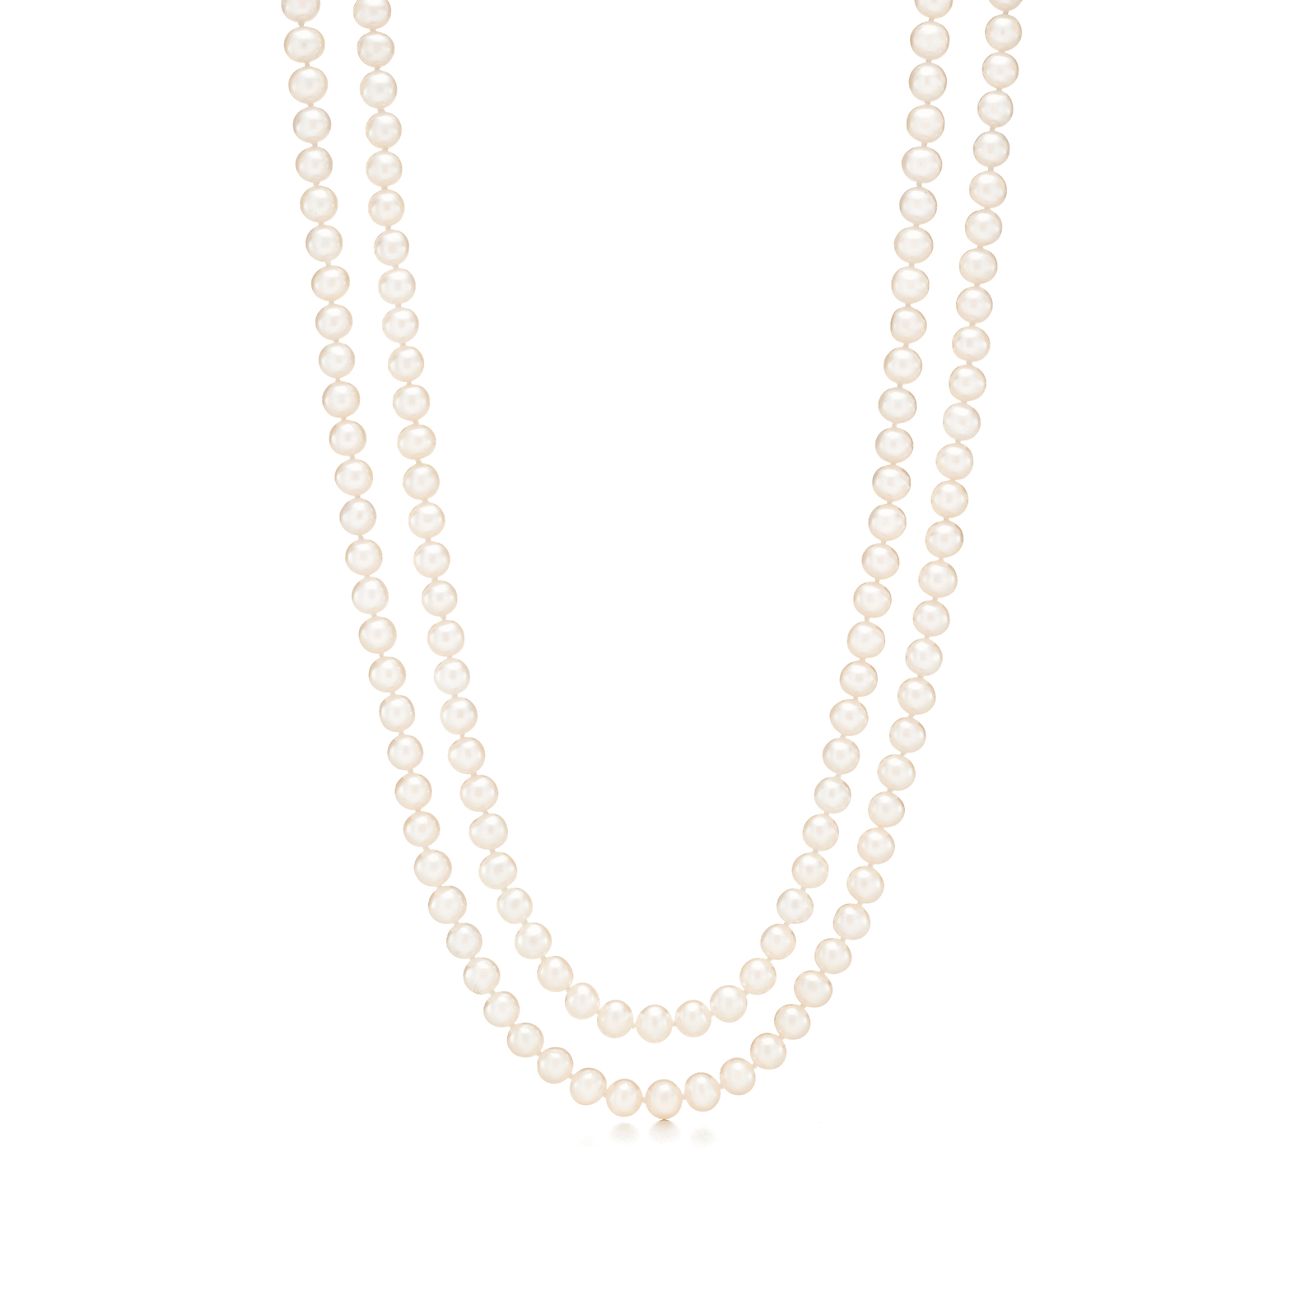 Ziegfeld Collection necklace of 